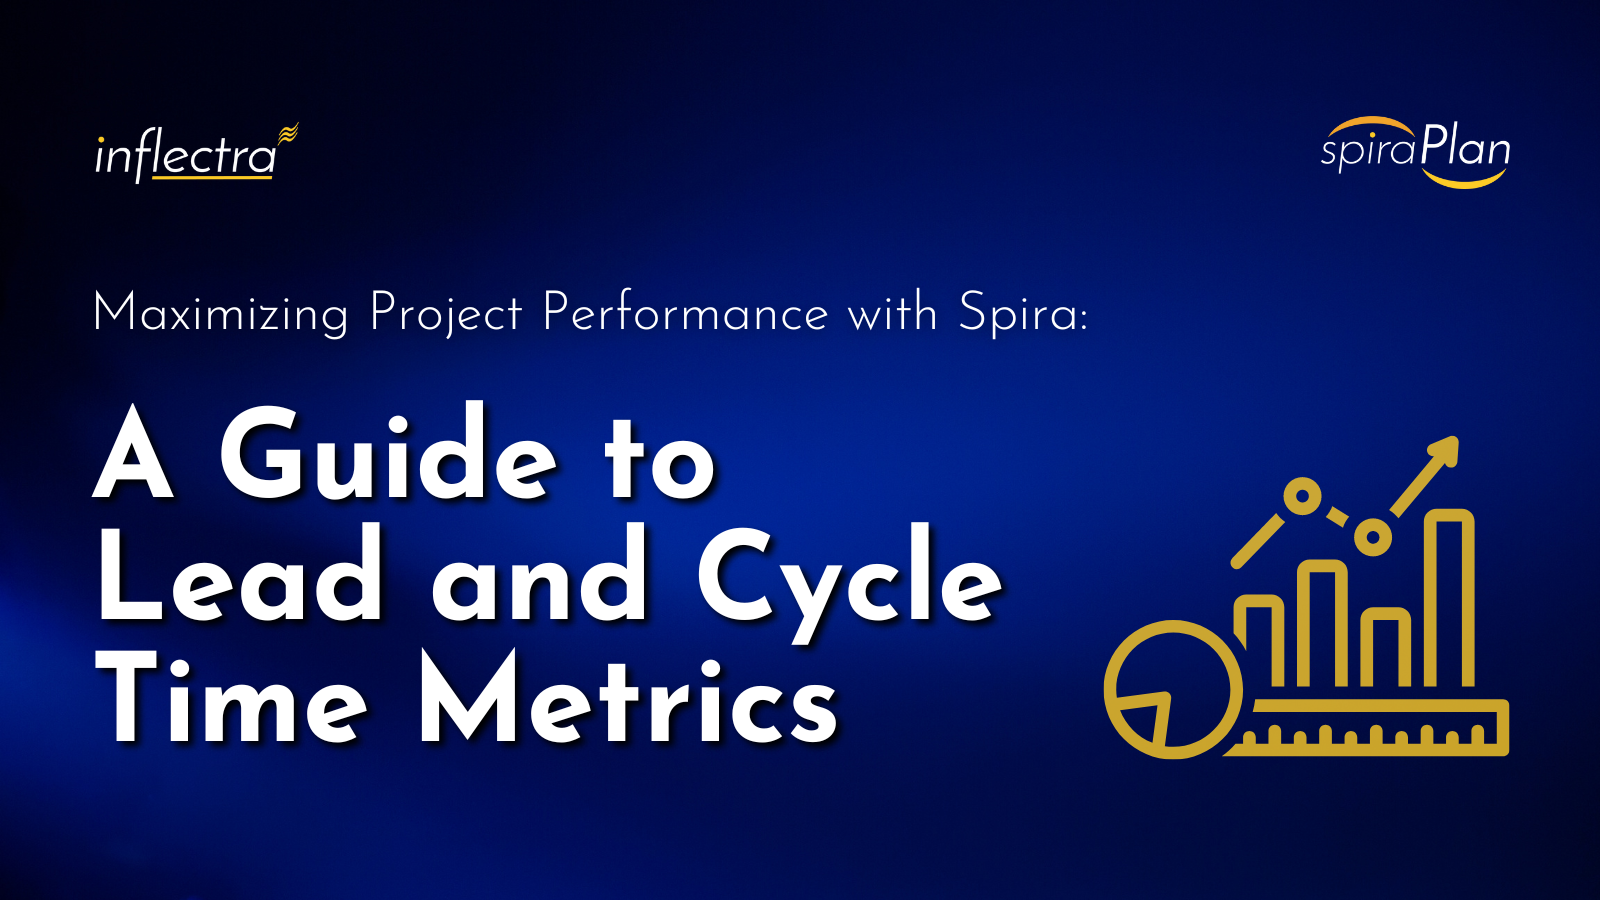 maximizing-project-performance-with-spira-a-guide-to-lead-and-cycle-time-metrics-inflectra-image